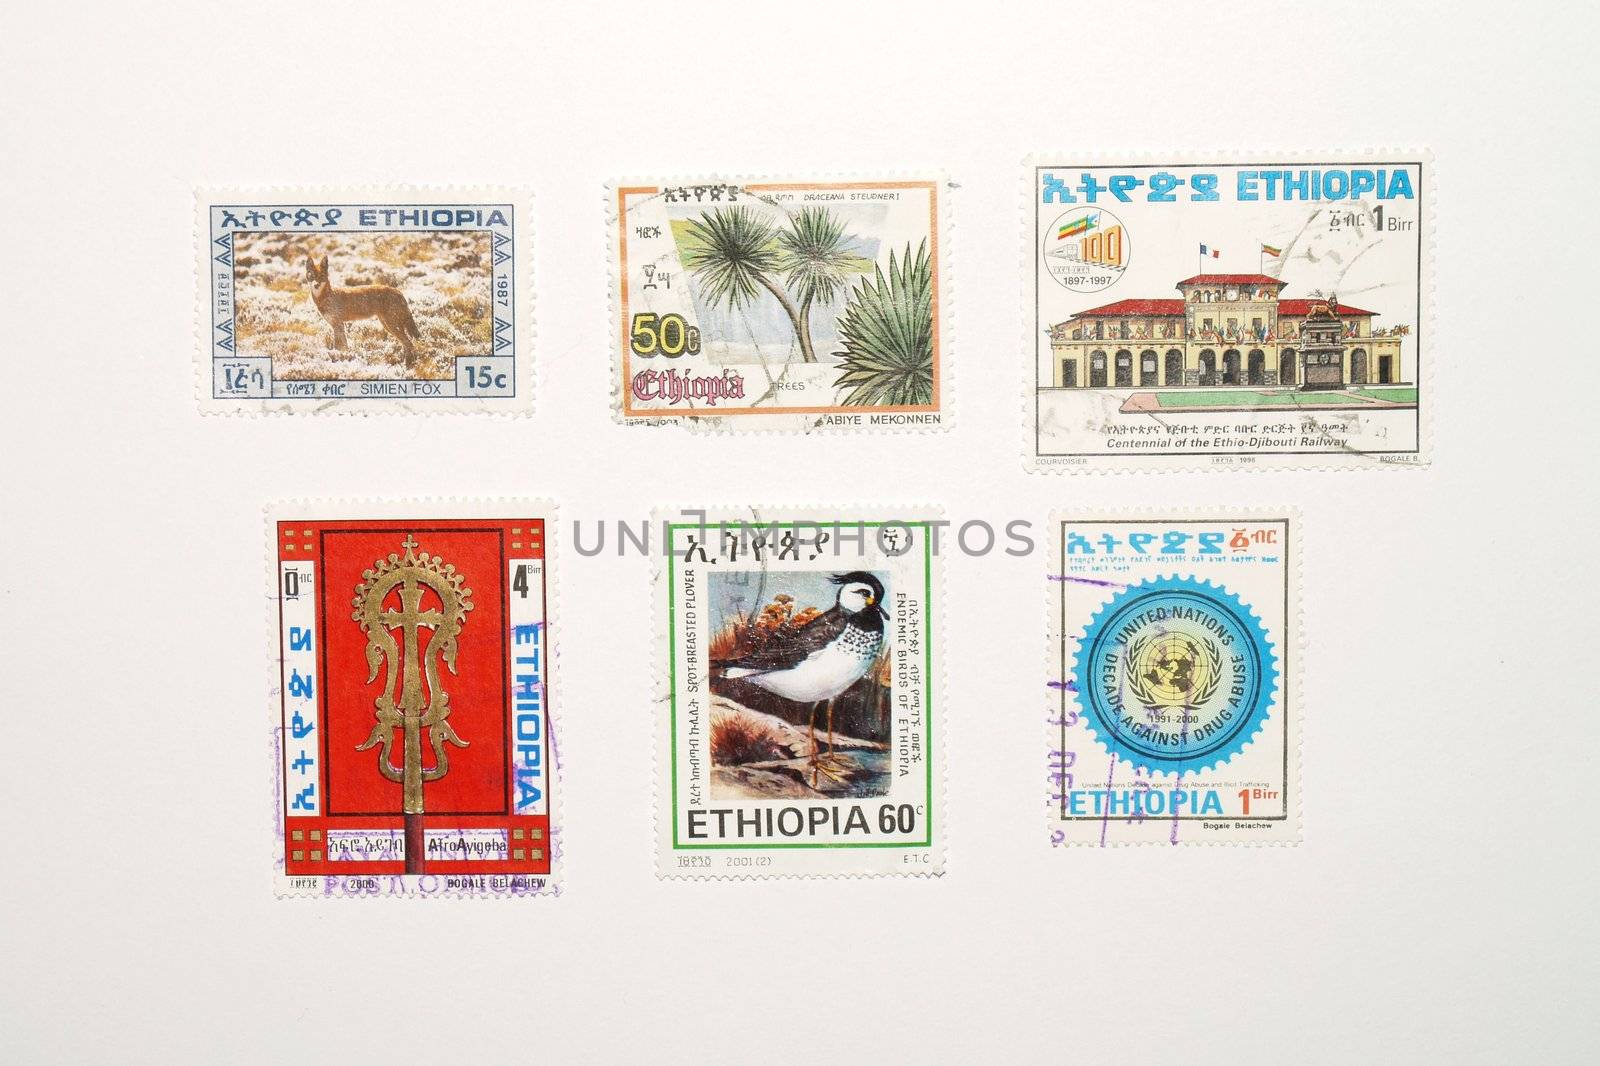 stamps from Ethiopia